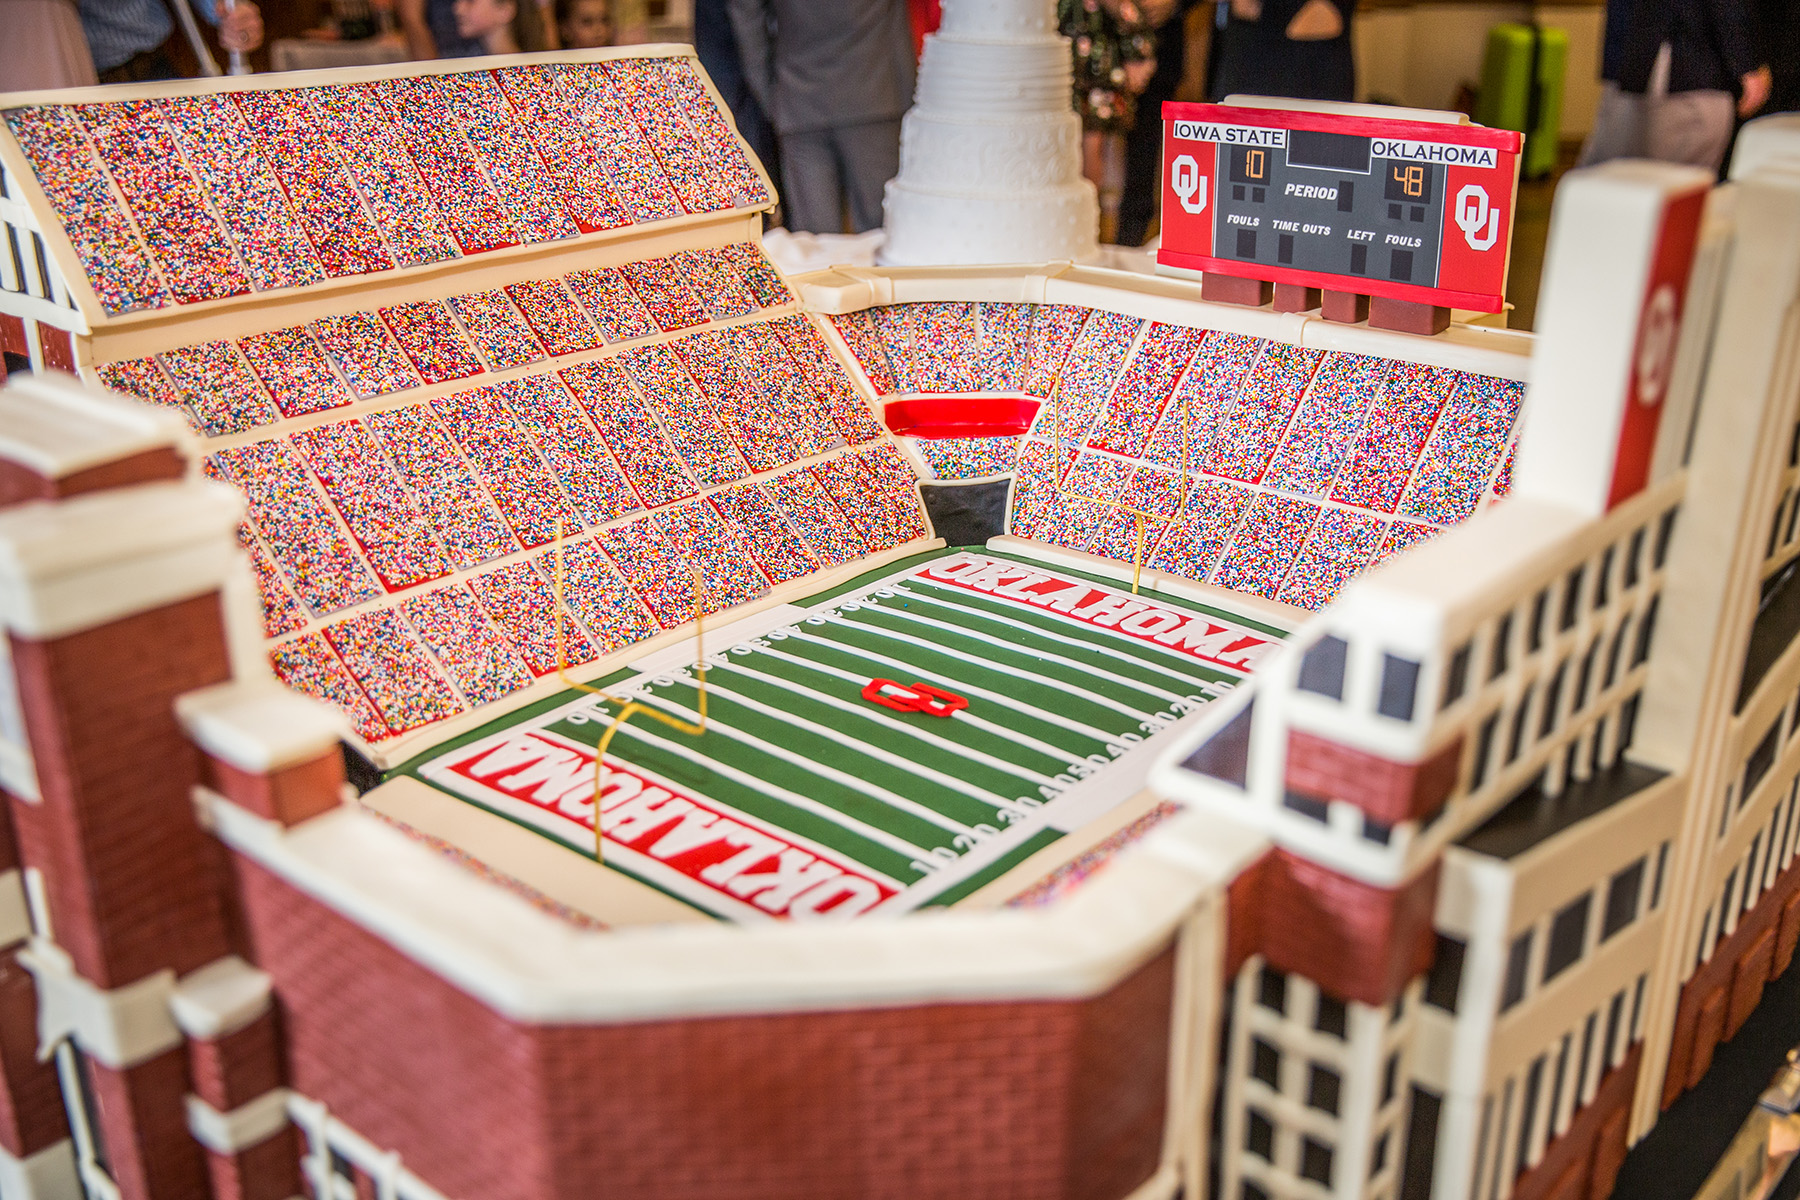 PHOTO: This massive 150-pound Oklahoma University football stadium cake made for a groom on his wedding day has gone viral. 